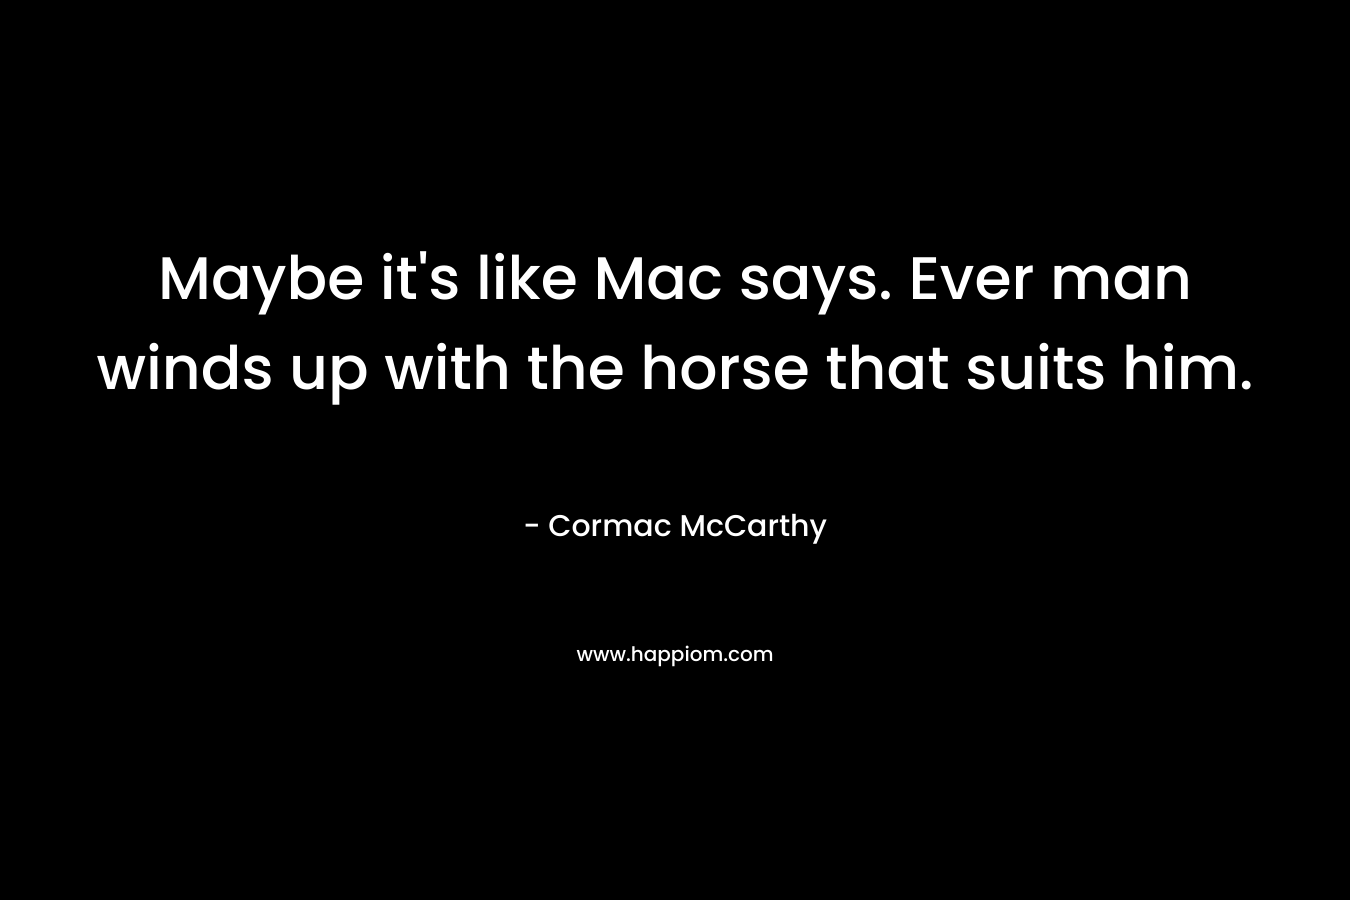 Maybe it's like Mac says. Ever man winds up with the horse that suits him.